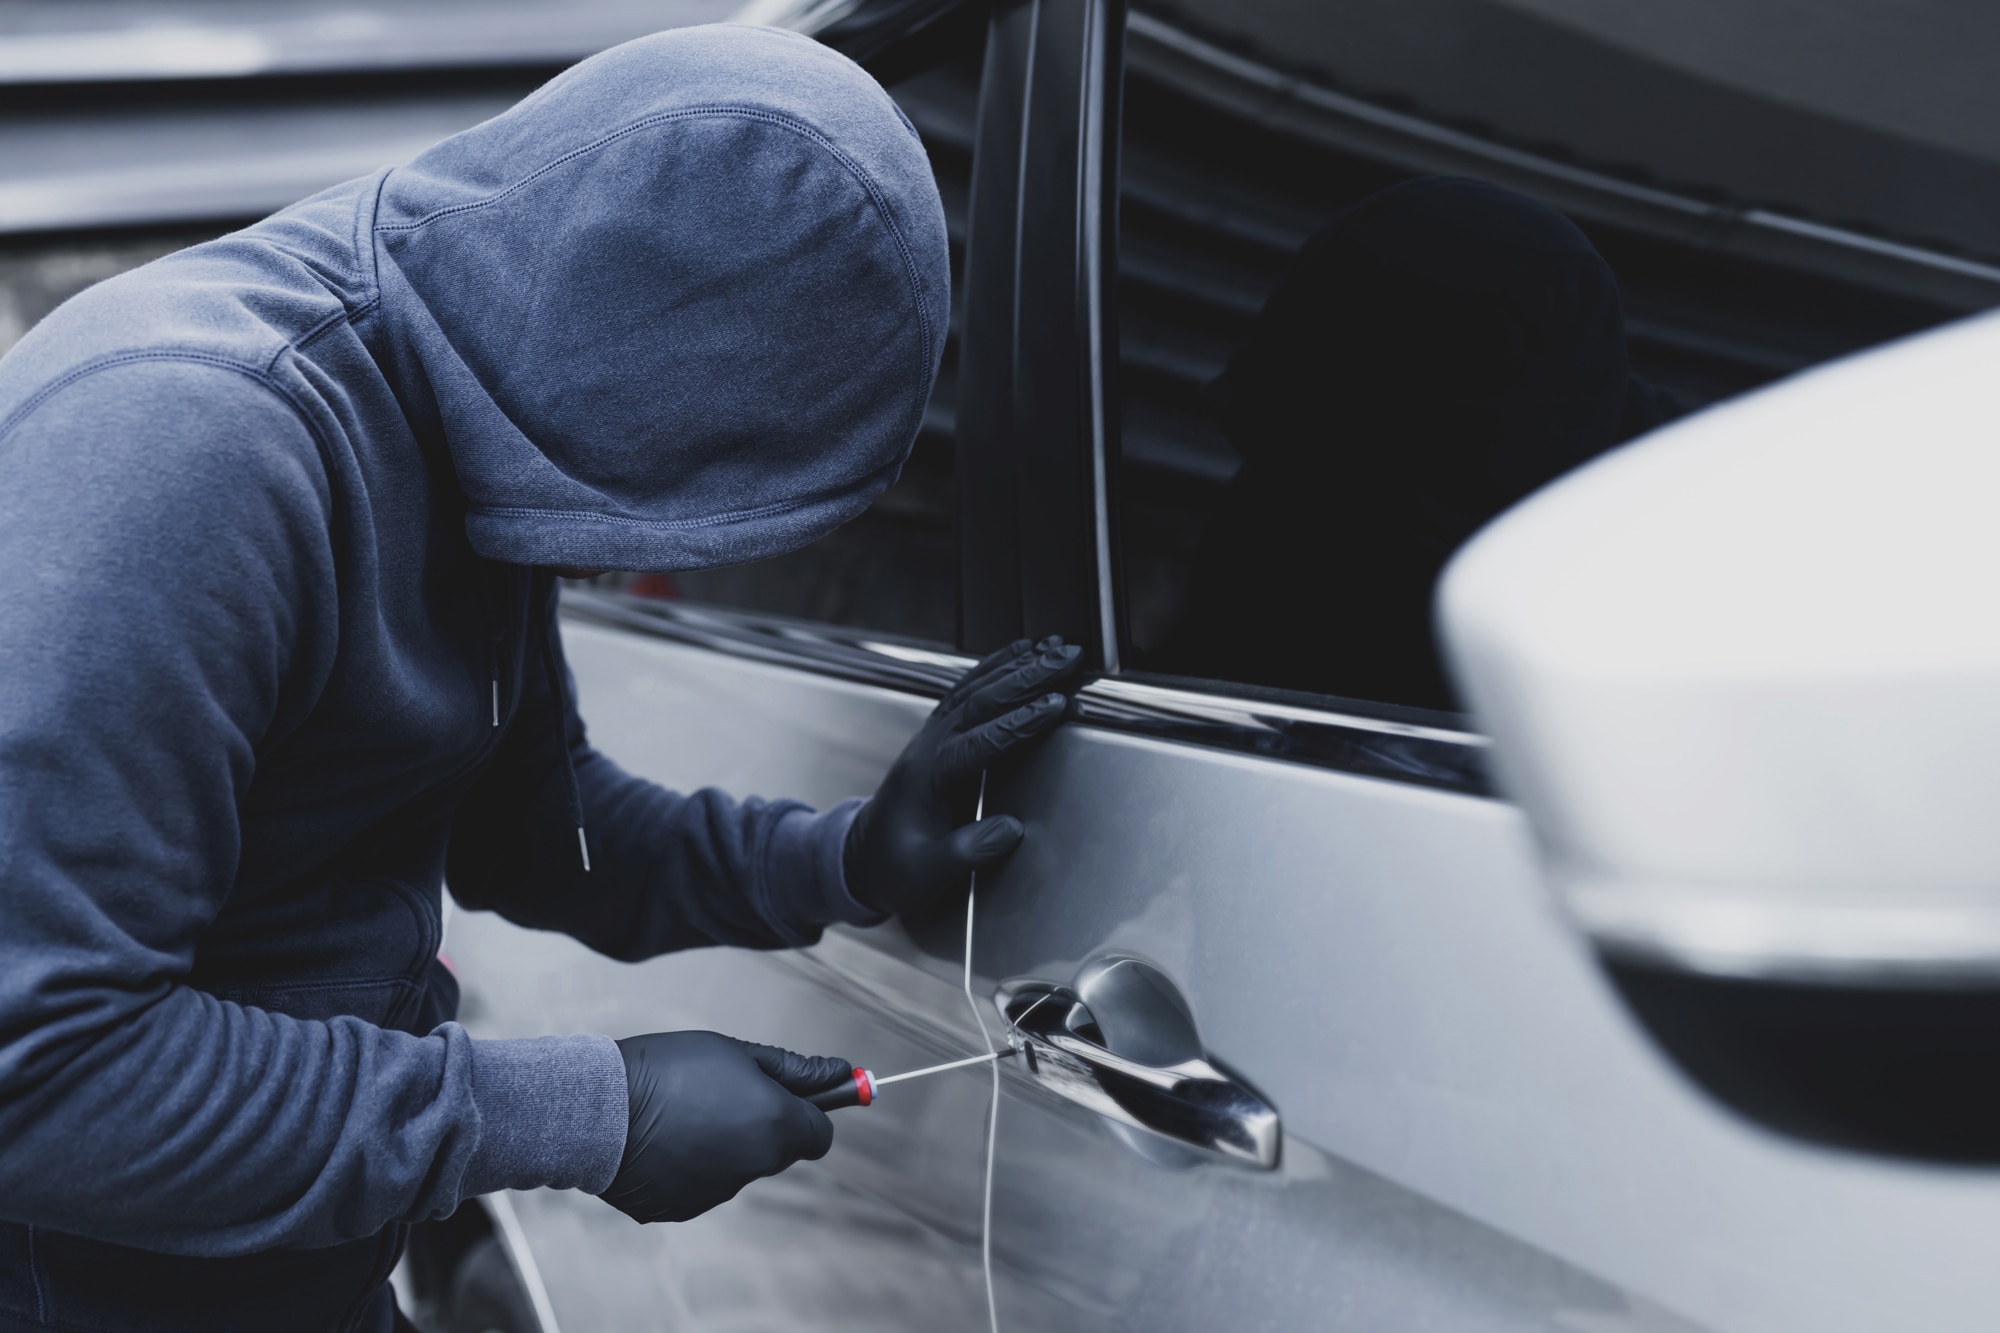 Hooded man trying to break into a car with a screwdriver